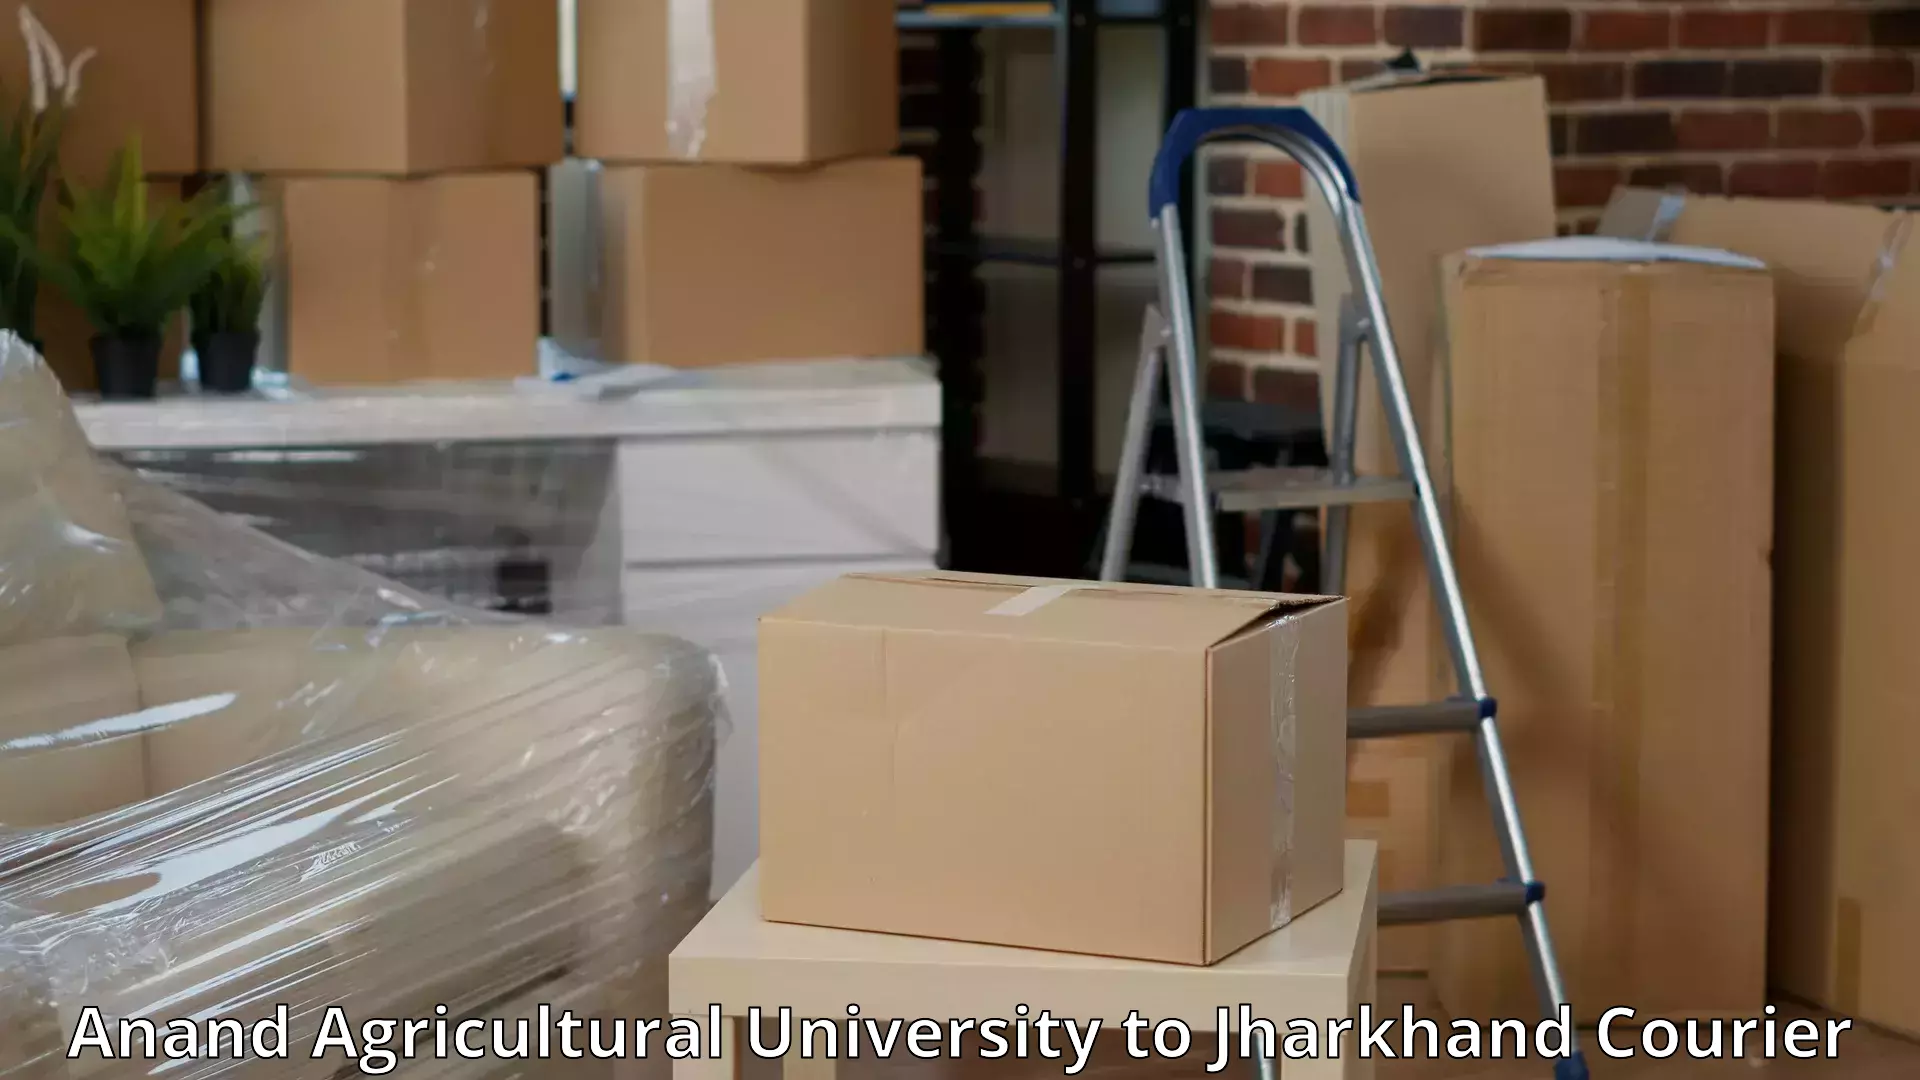 Professional packing services in Anand Agricultural University to Shikaripara